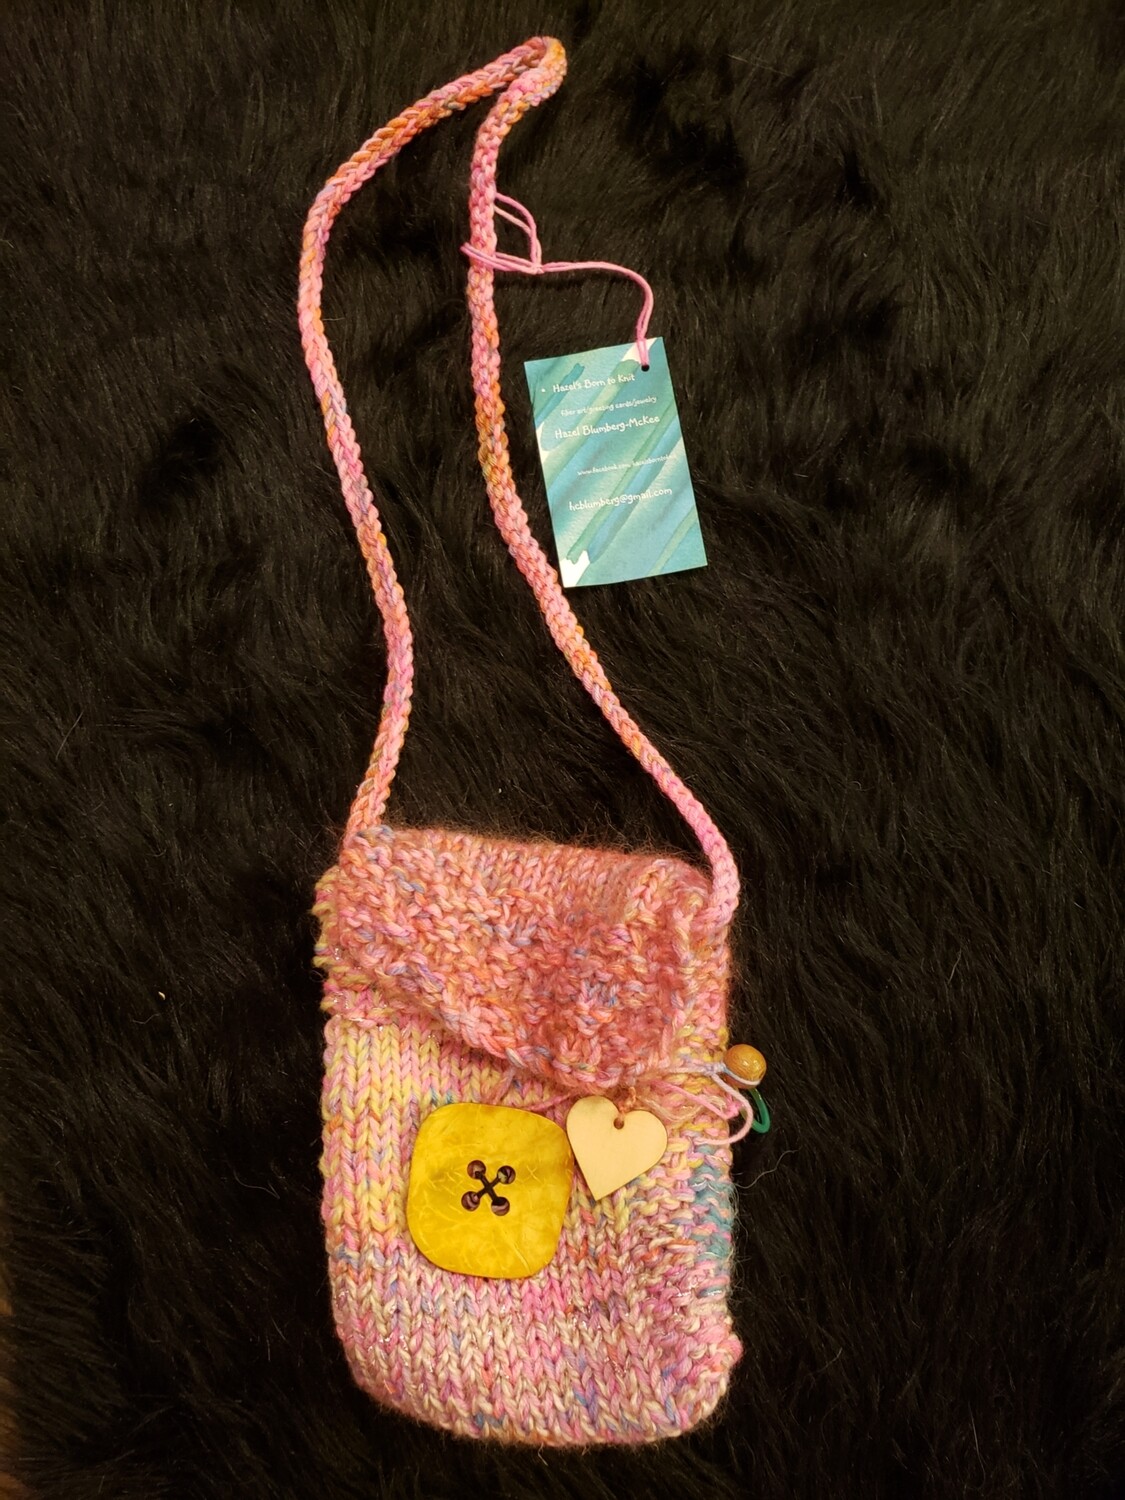 Cell phone satchel with giant wooden button-Knitted Bags by Hazel